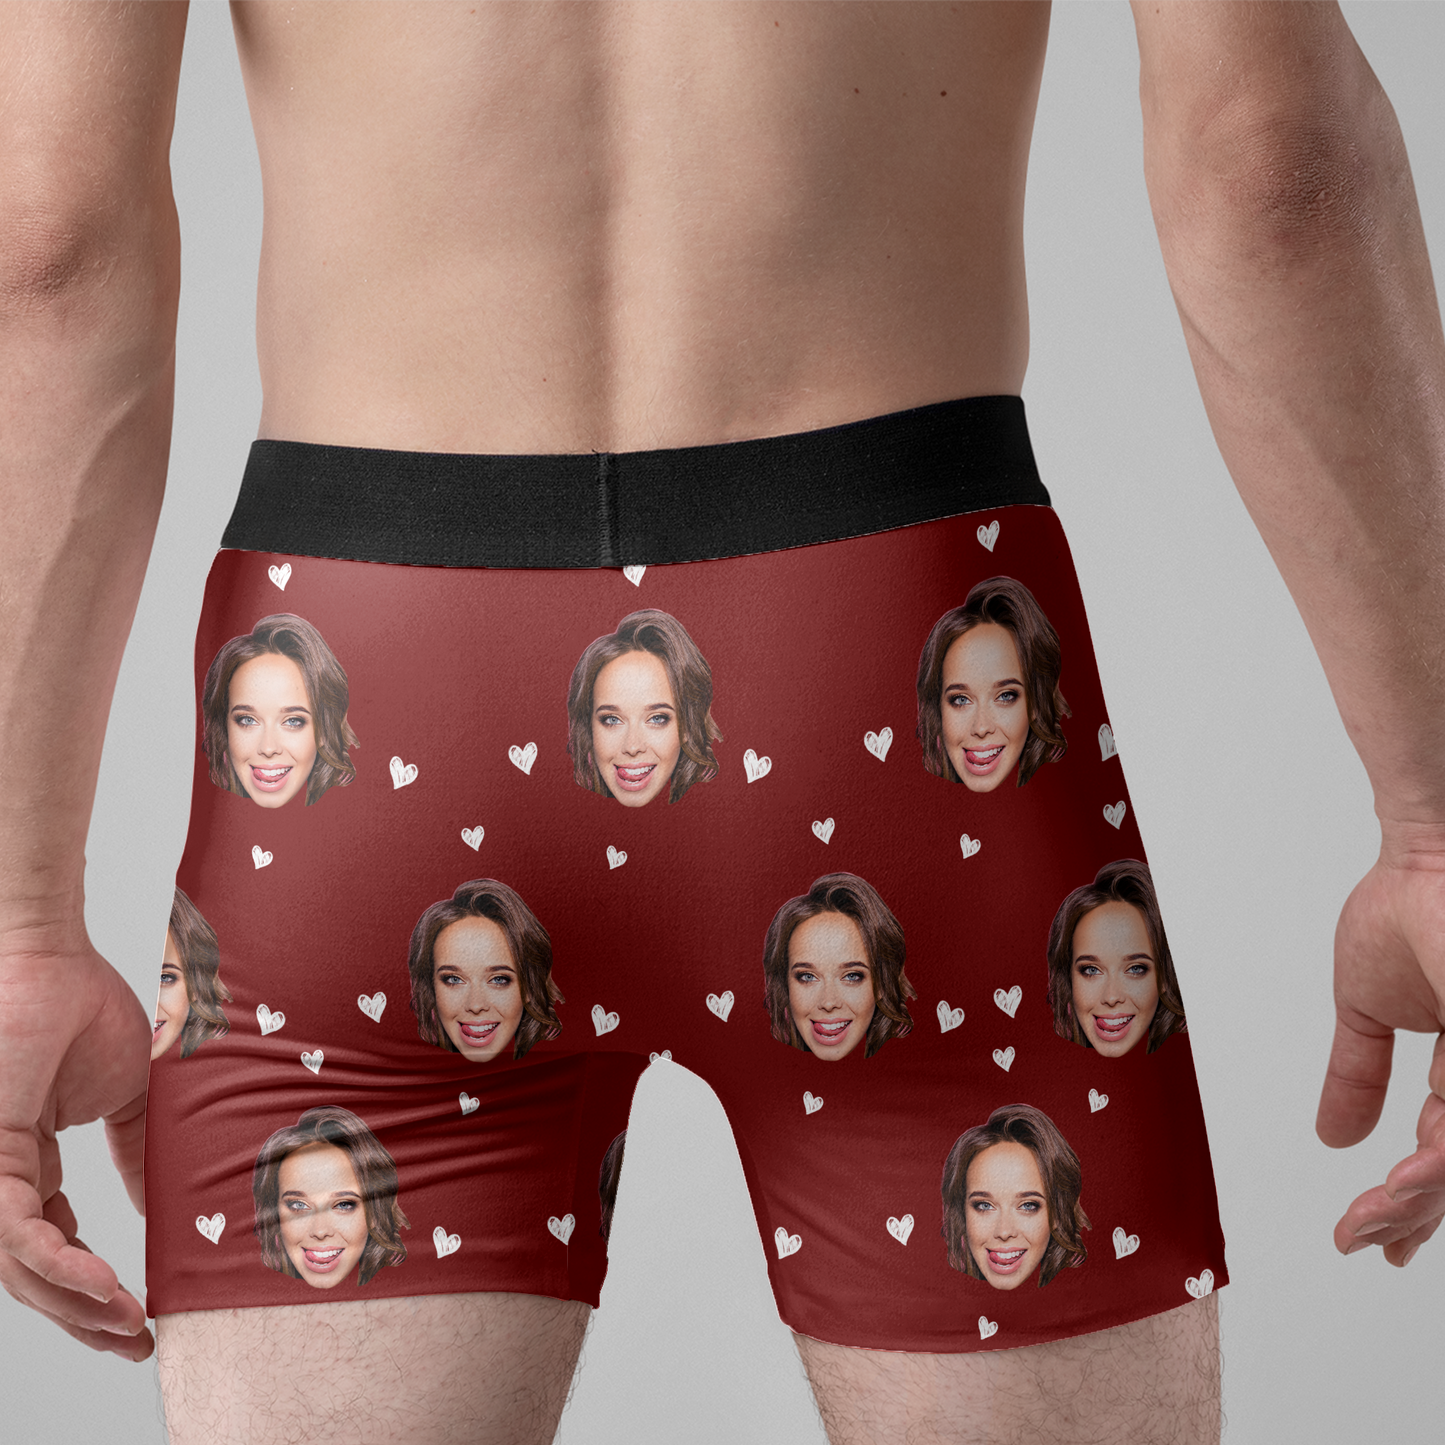 I Love You For Who You Are But That Sure Is A Bonus - Personalized Photo Men's Boxer Briefs